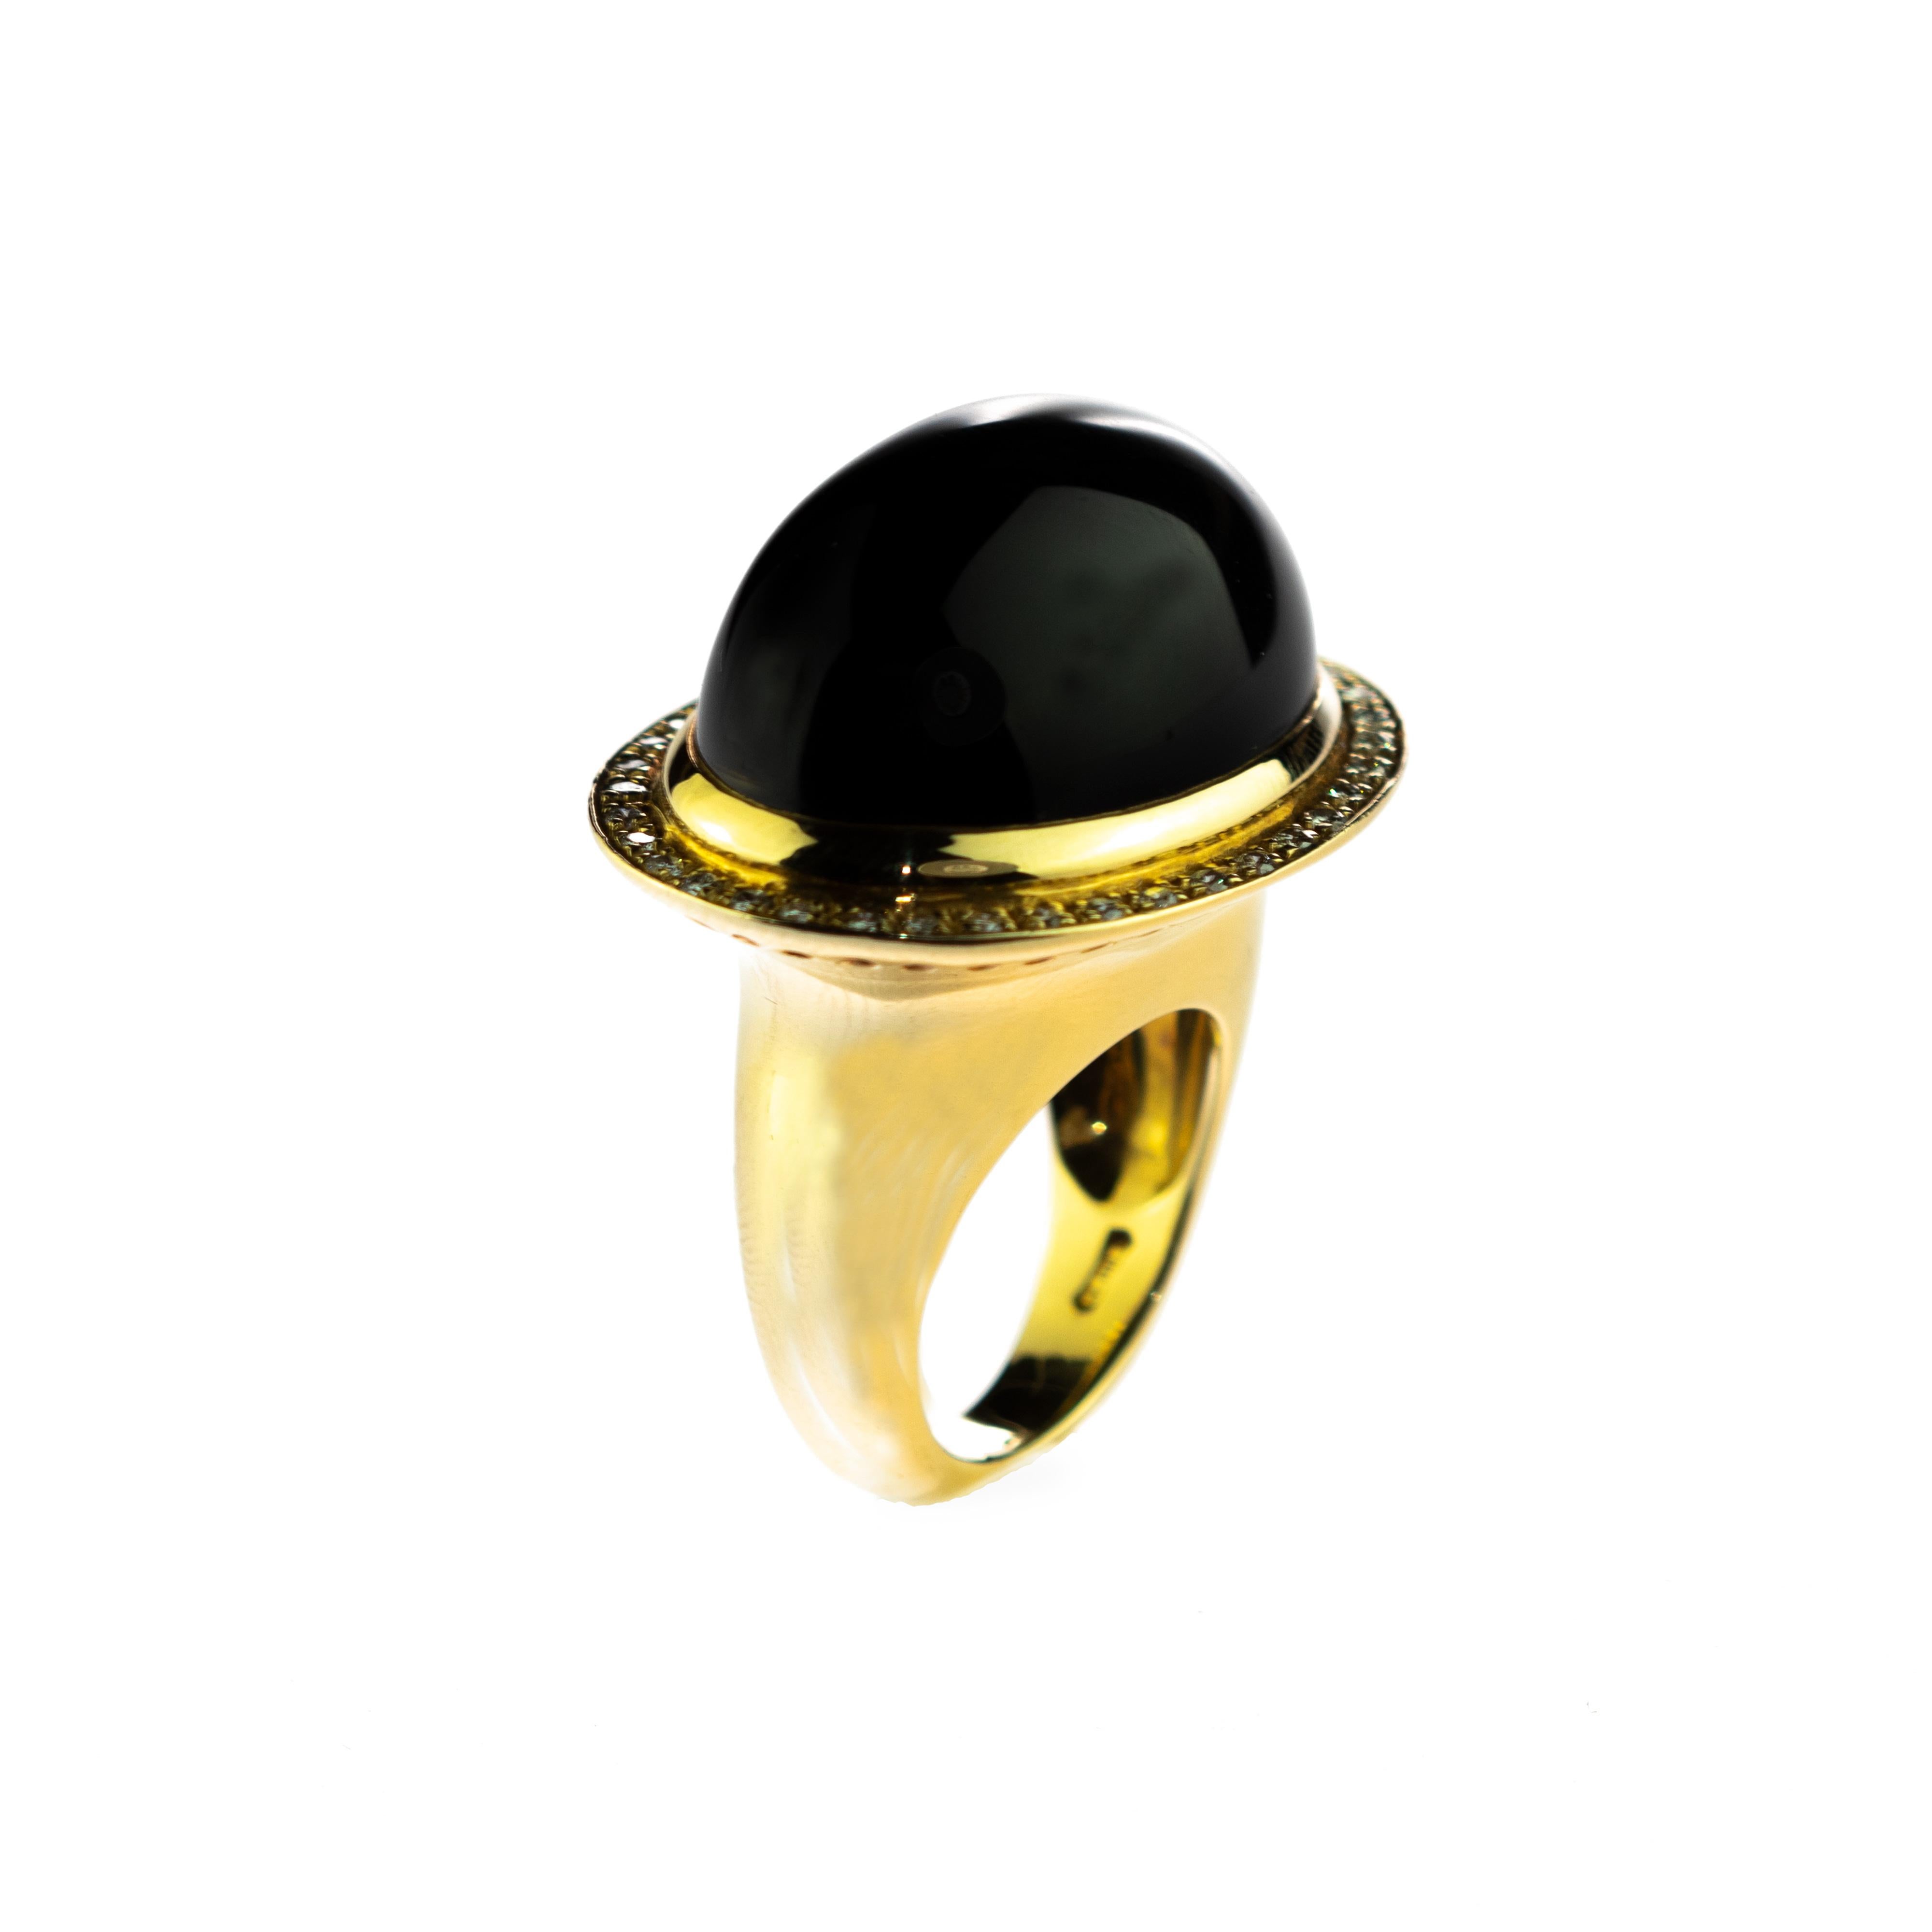 Stunning masterpiece with a black oval cut agate stone encircled by shining diamonds.

This ring is inspired by the human mind. It shows the greatness of an unknown and infinite knowledge that we must explore every day. Diamonds represent the soul